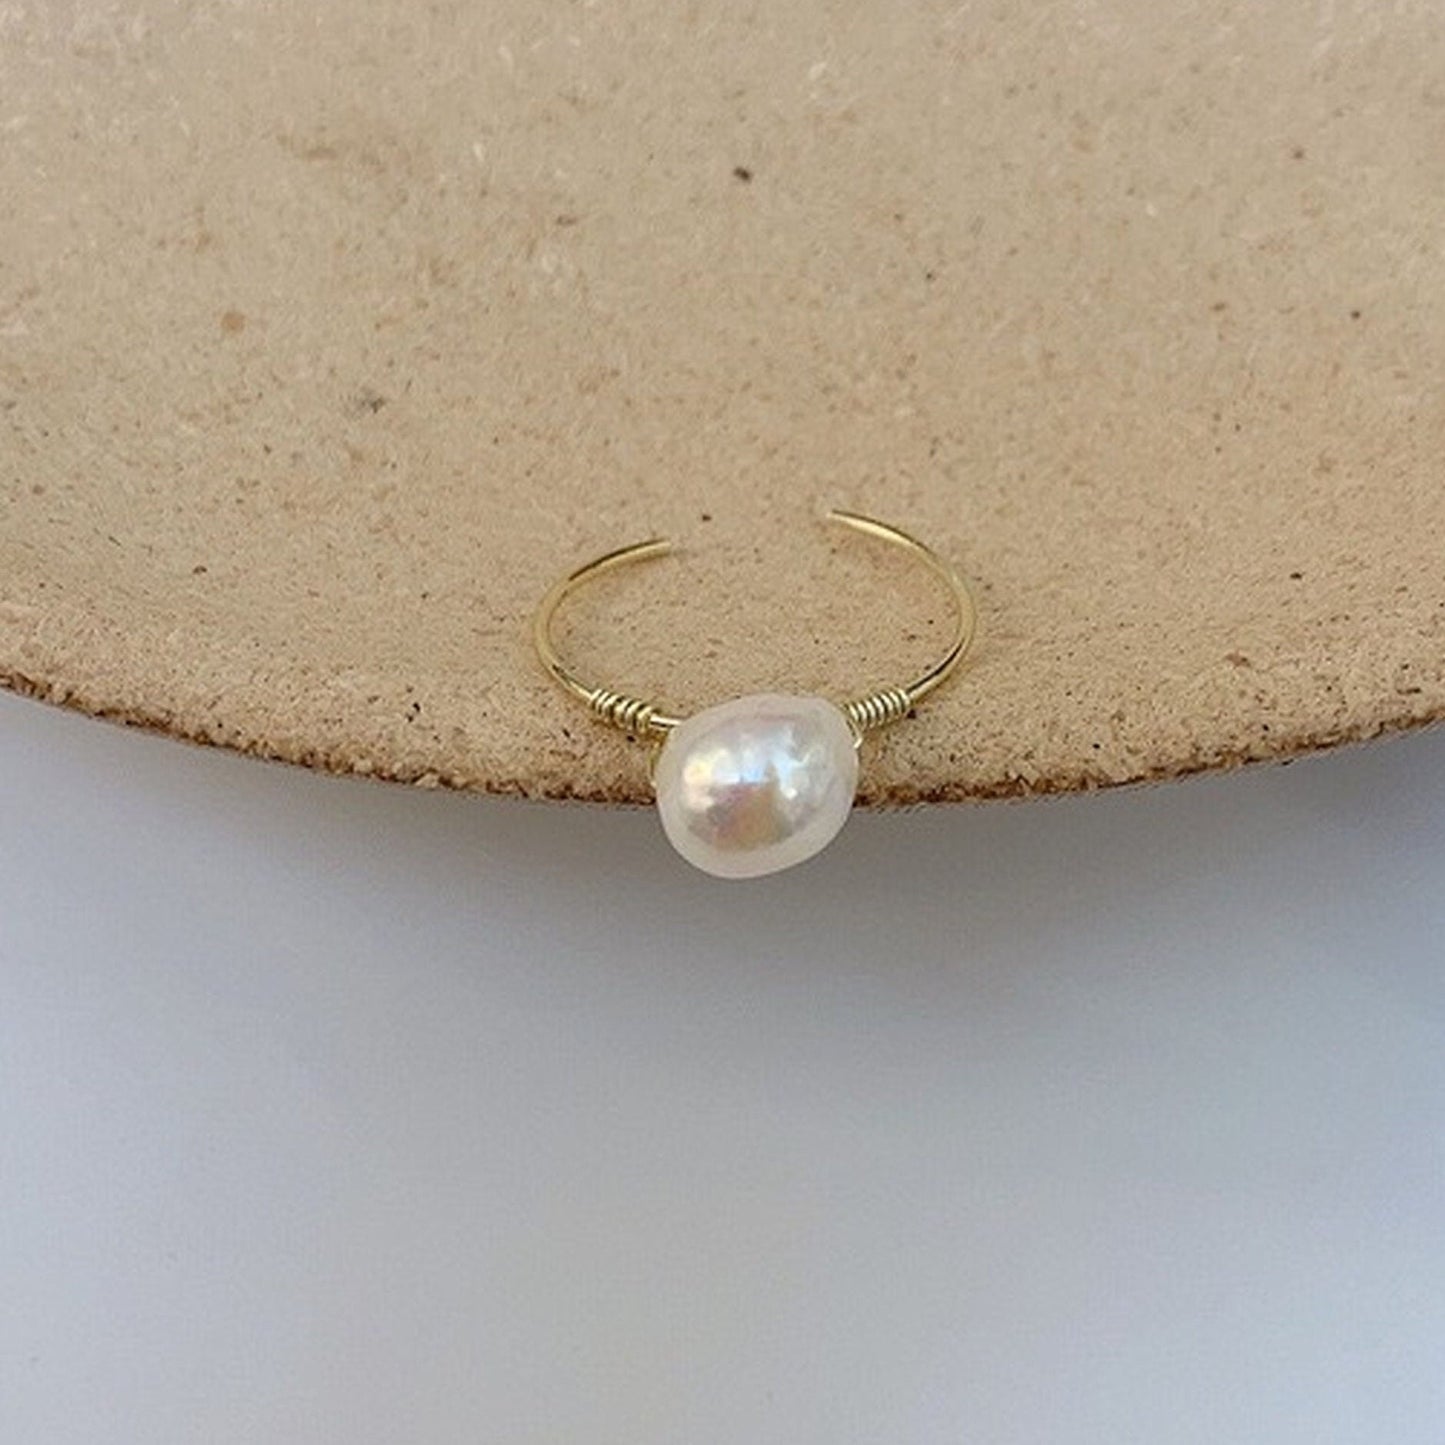 Natural Pearl Ring, Handmade Pearl Ring, Gold Pearl Twist Ring, Pearl Statement Cocktail Ring, Baroque Pearl Ring, Open Ring, Birthdaty Gift